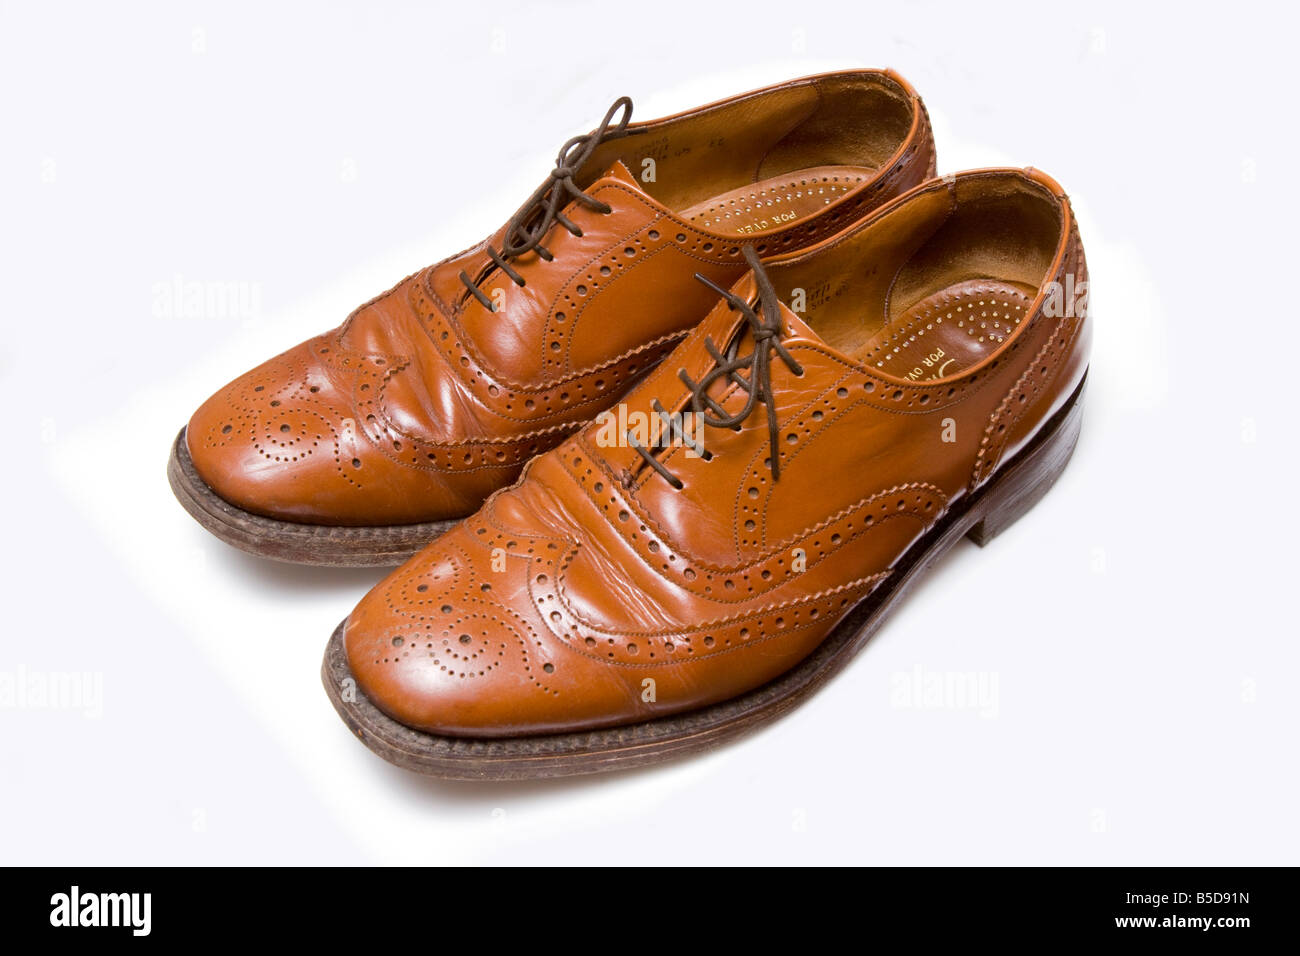 Fashionable men's leather shoes in vintage style Stock Photo by  ©Devin_Pavel 60864261